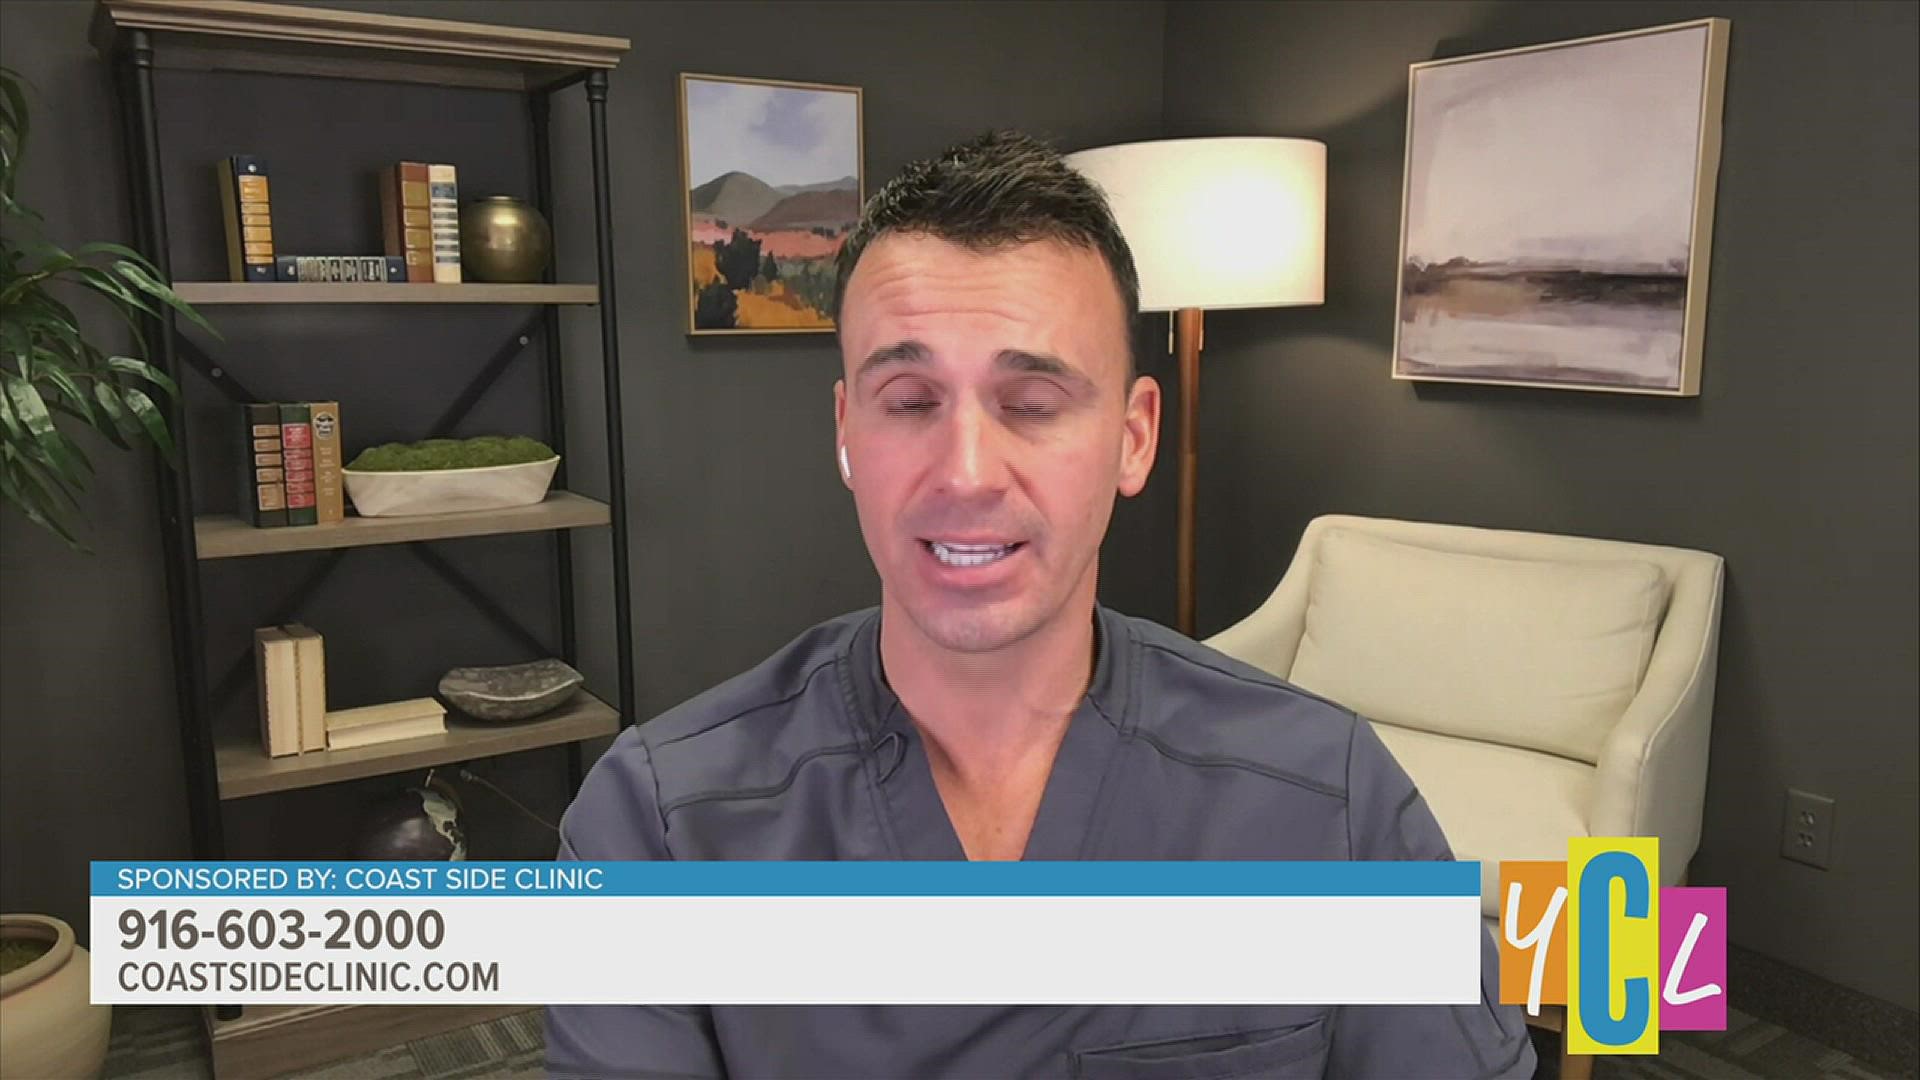 Men no longer have to suffer in silence with ED. Learn about the true pulse protocol that has helped others. This segment paid for by Coast Side Clinic.